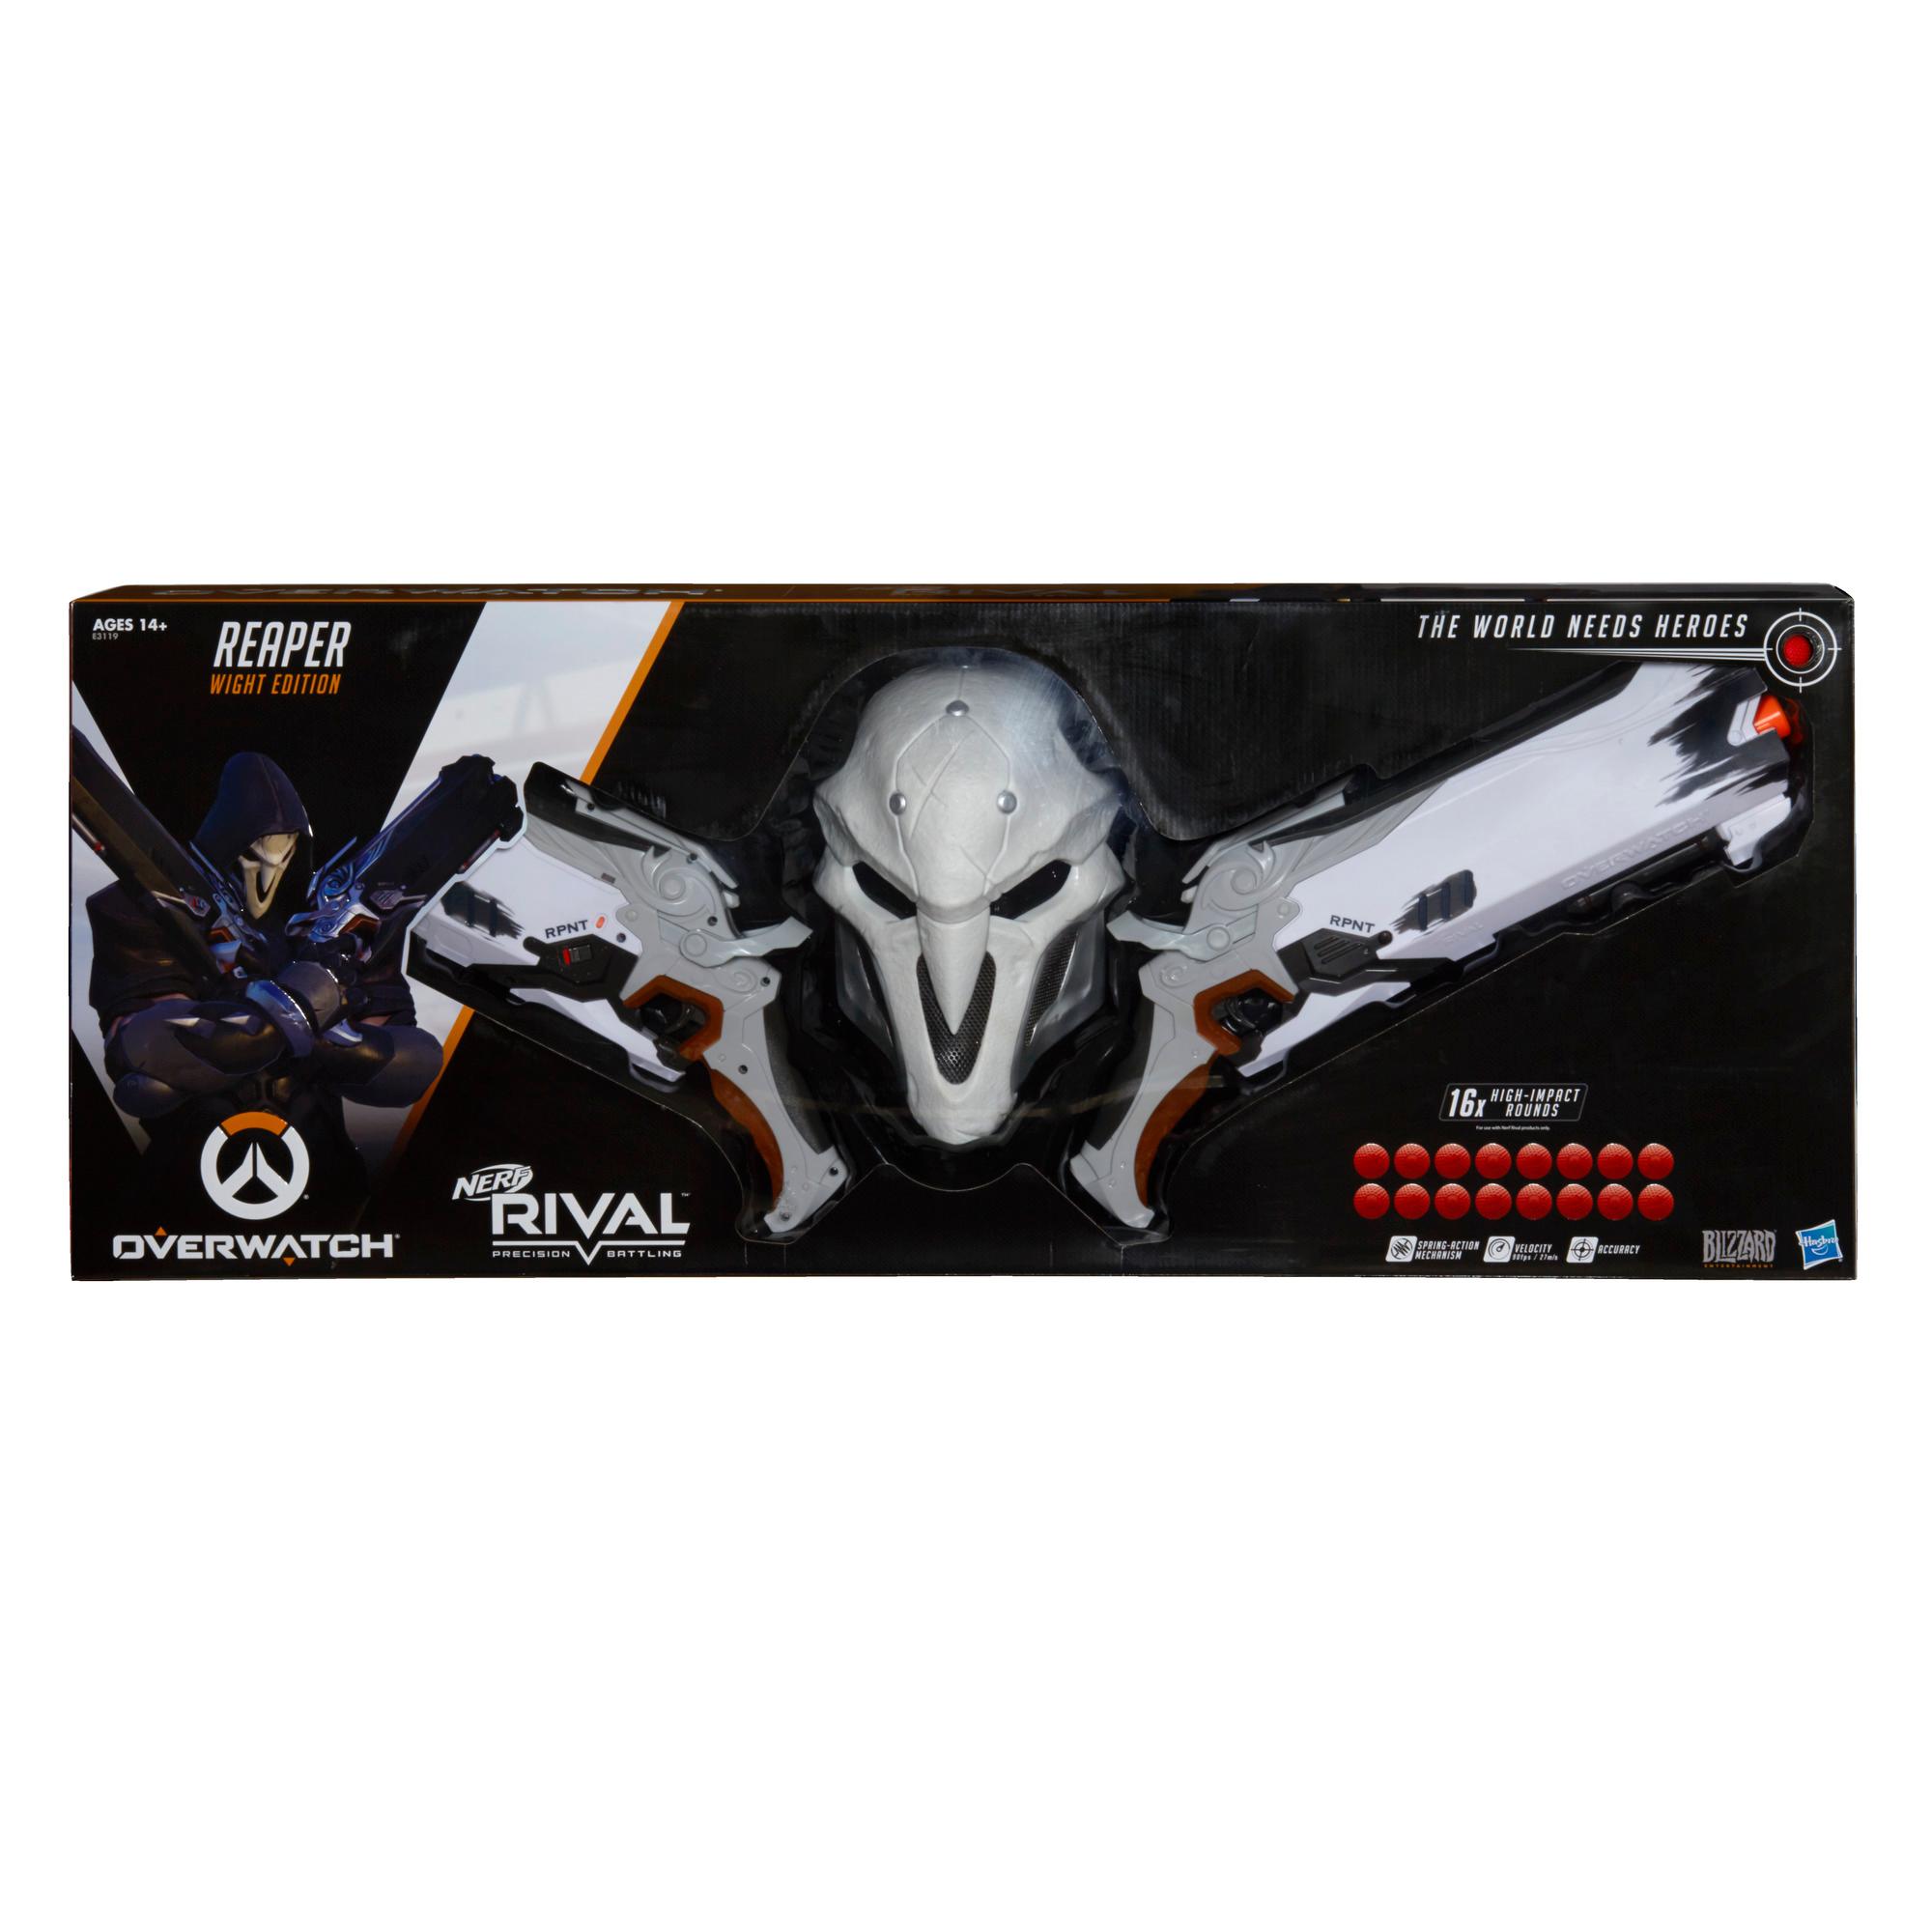 Details about   Nerf Rival Overwatch Reaper White Edition Collector Pack New 